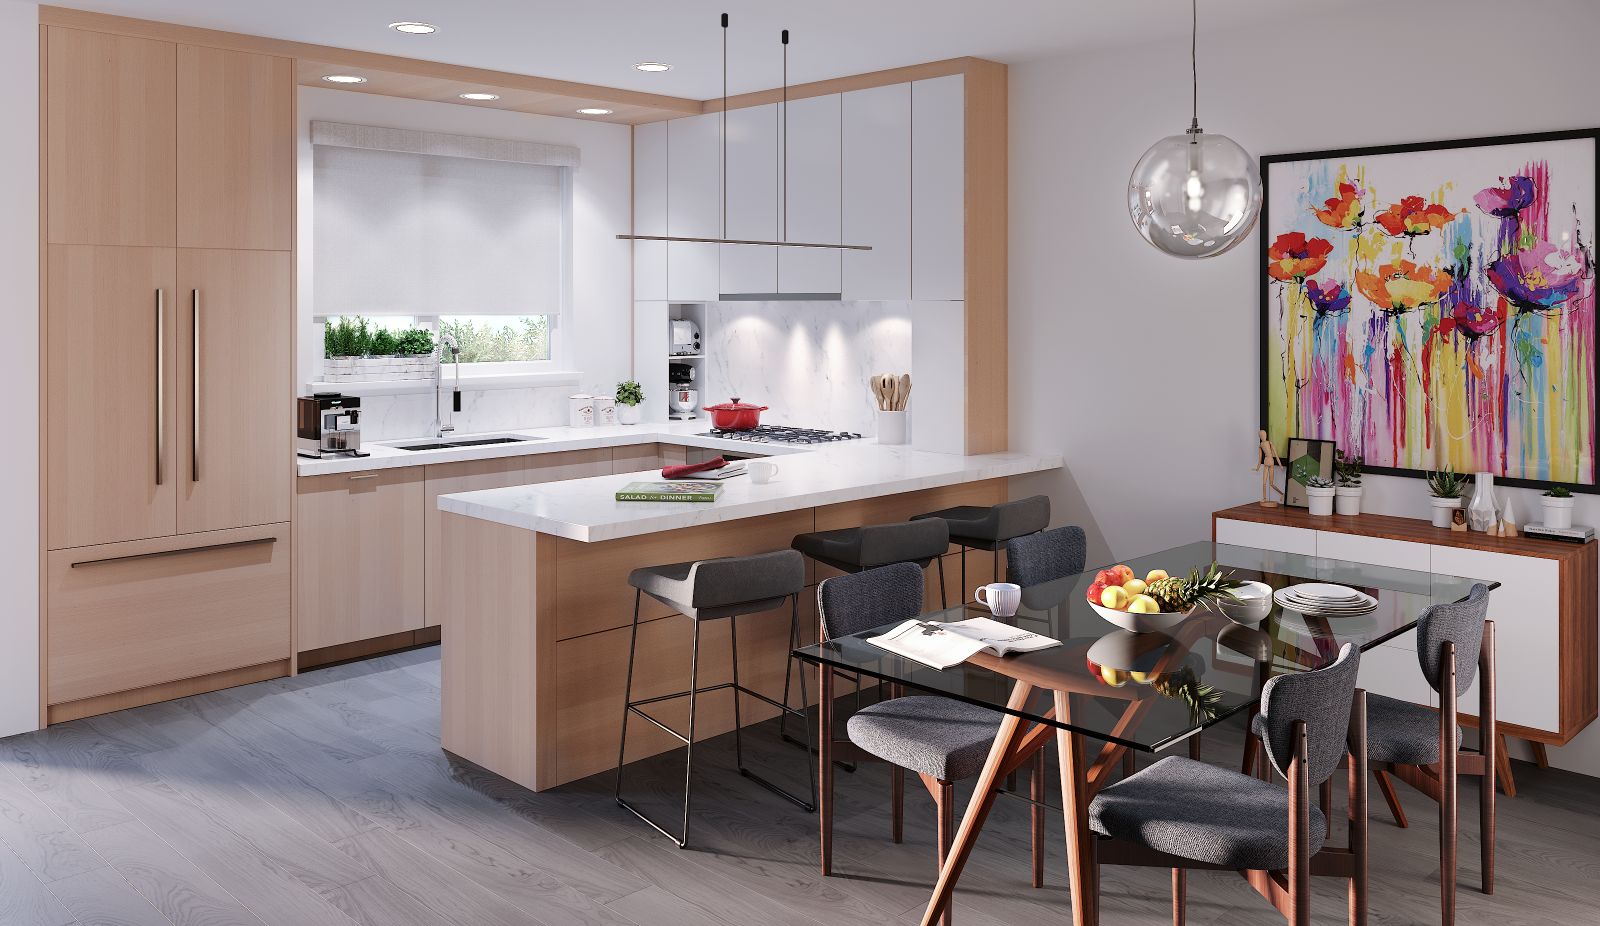 We want your kitchen to be as functional as possible — from the perfect placement of appliances to the best locations to plug in your devices.